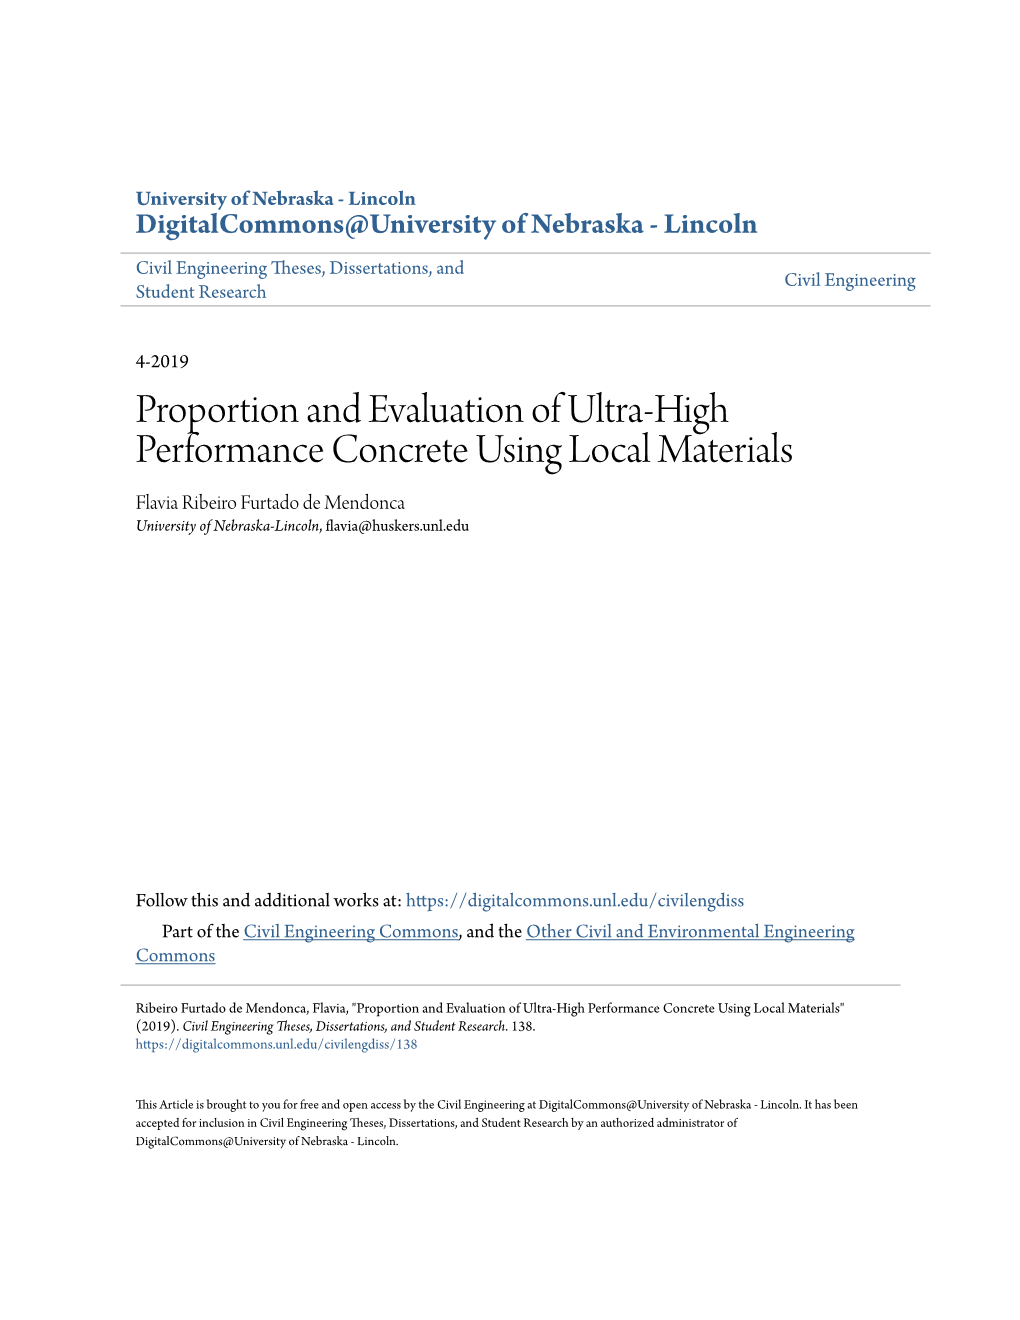 Proportion and Evaluation of Ultra-High Performance Concrete